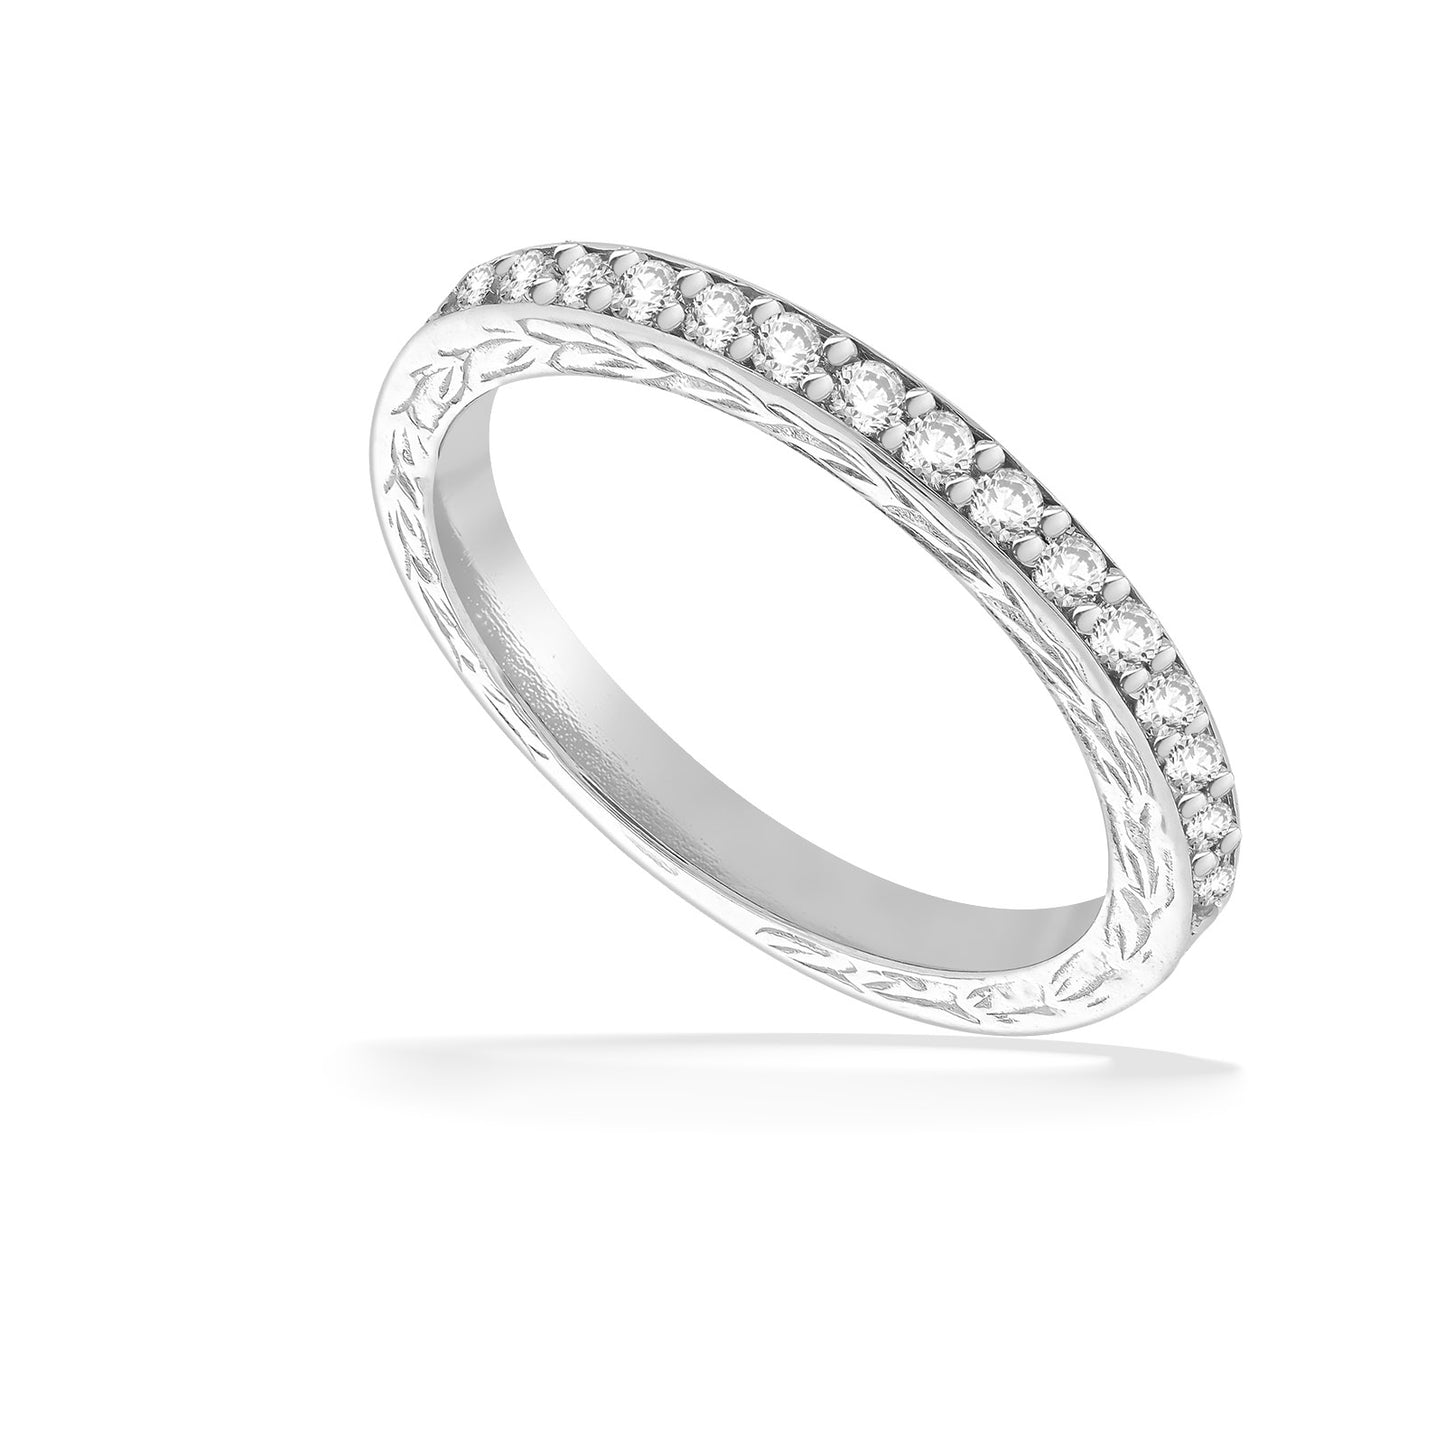 41783 - 14K White Gold - Maile Scroll Ring